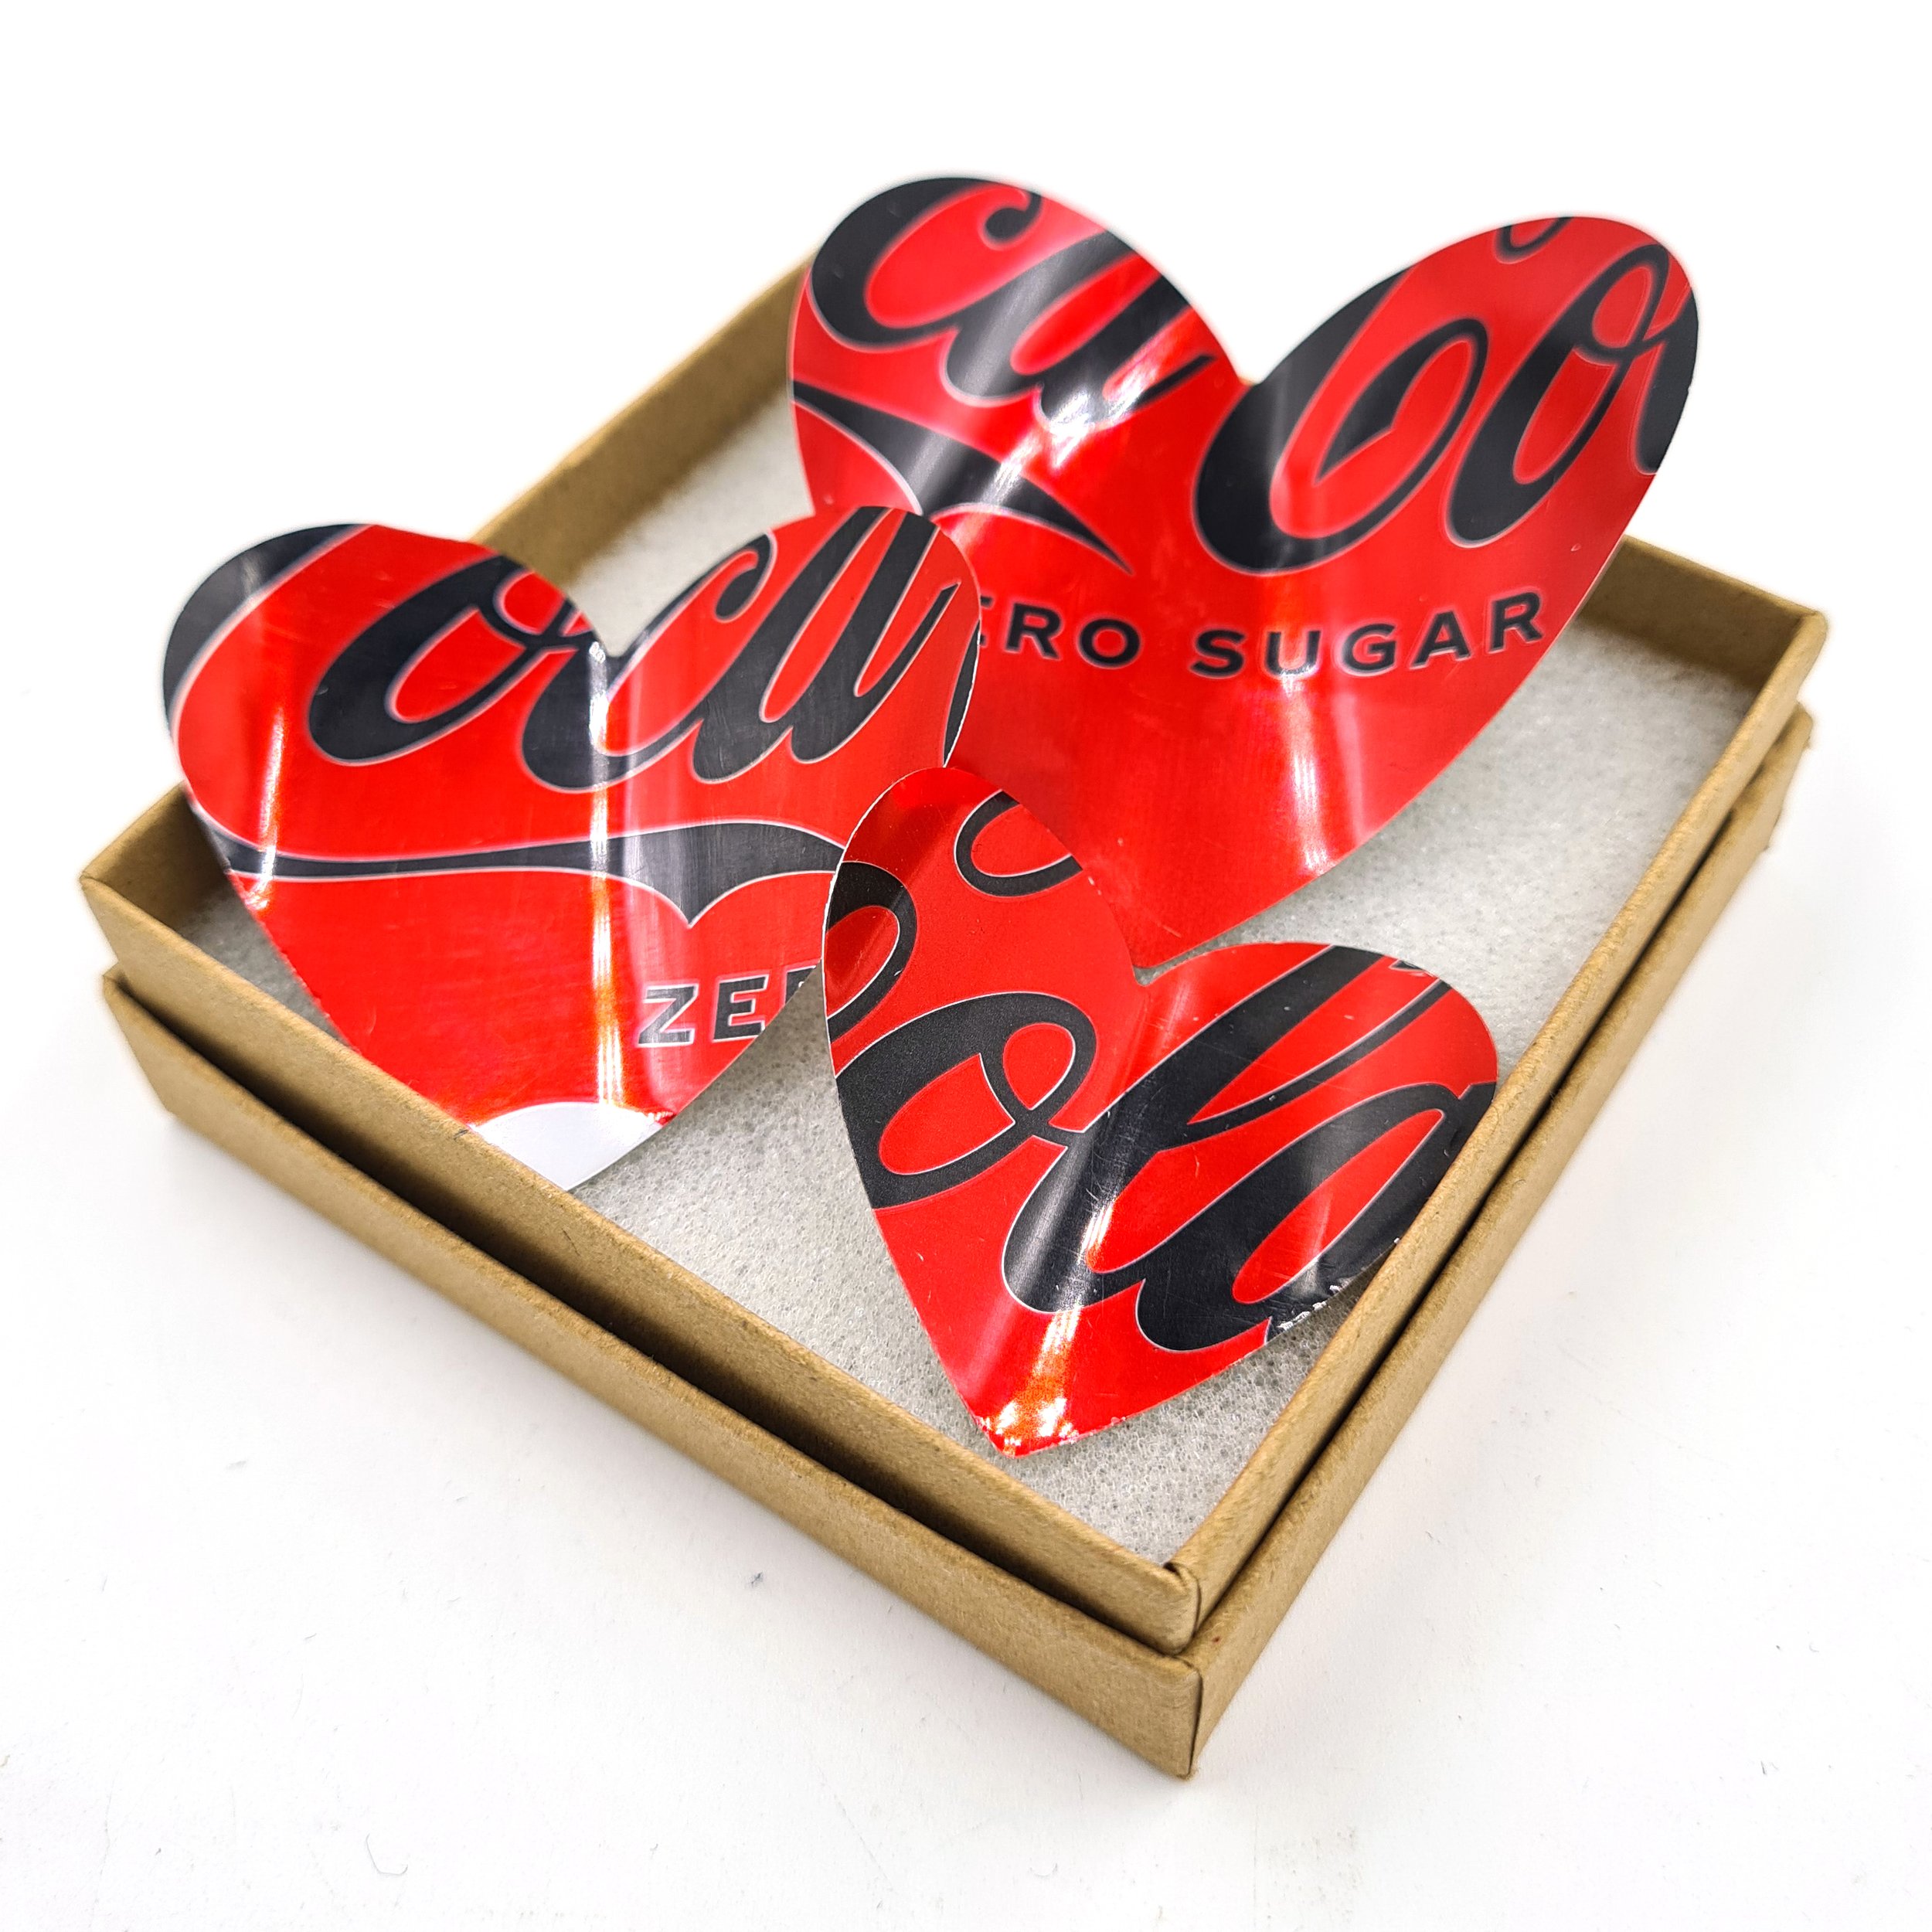 Coke Zero reycled can magnets Hearts 4 with gift box.jpg